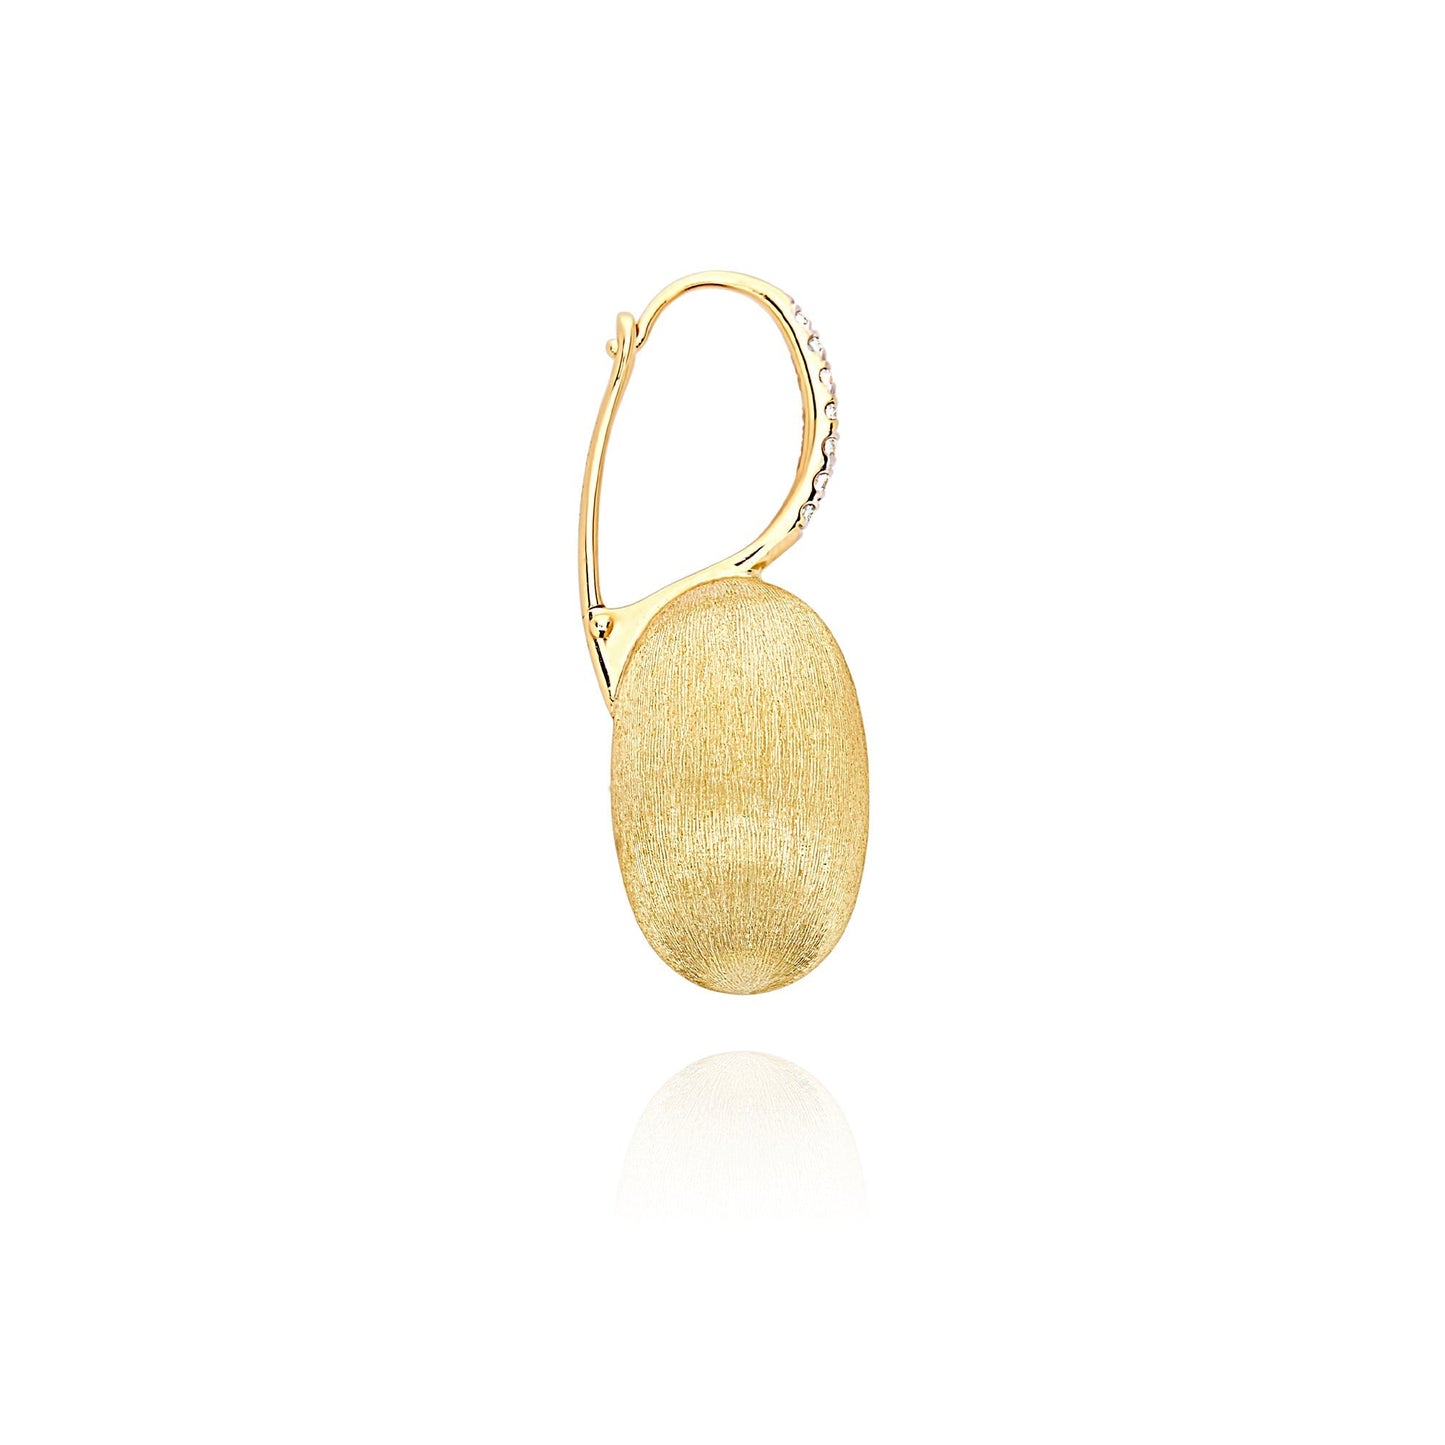 DANCING "CILIEGINA" GOLD BALL DROP SINGLE EARRING WITH DIAMONDS DETAILS (LARGE)